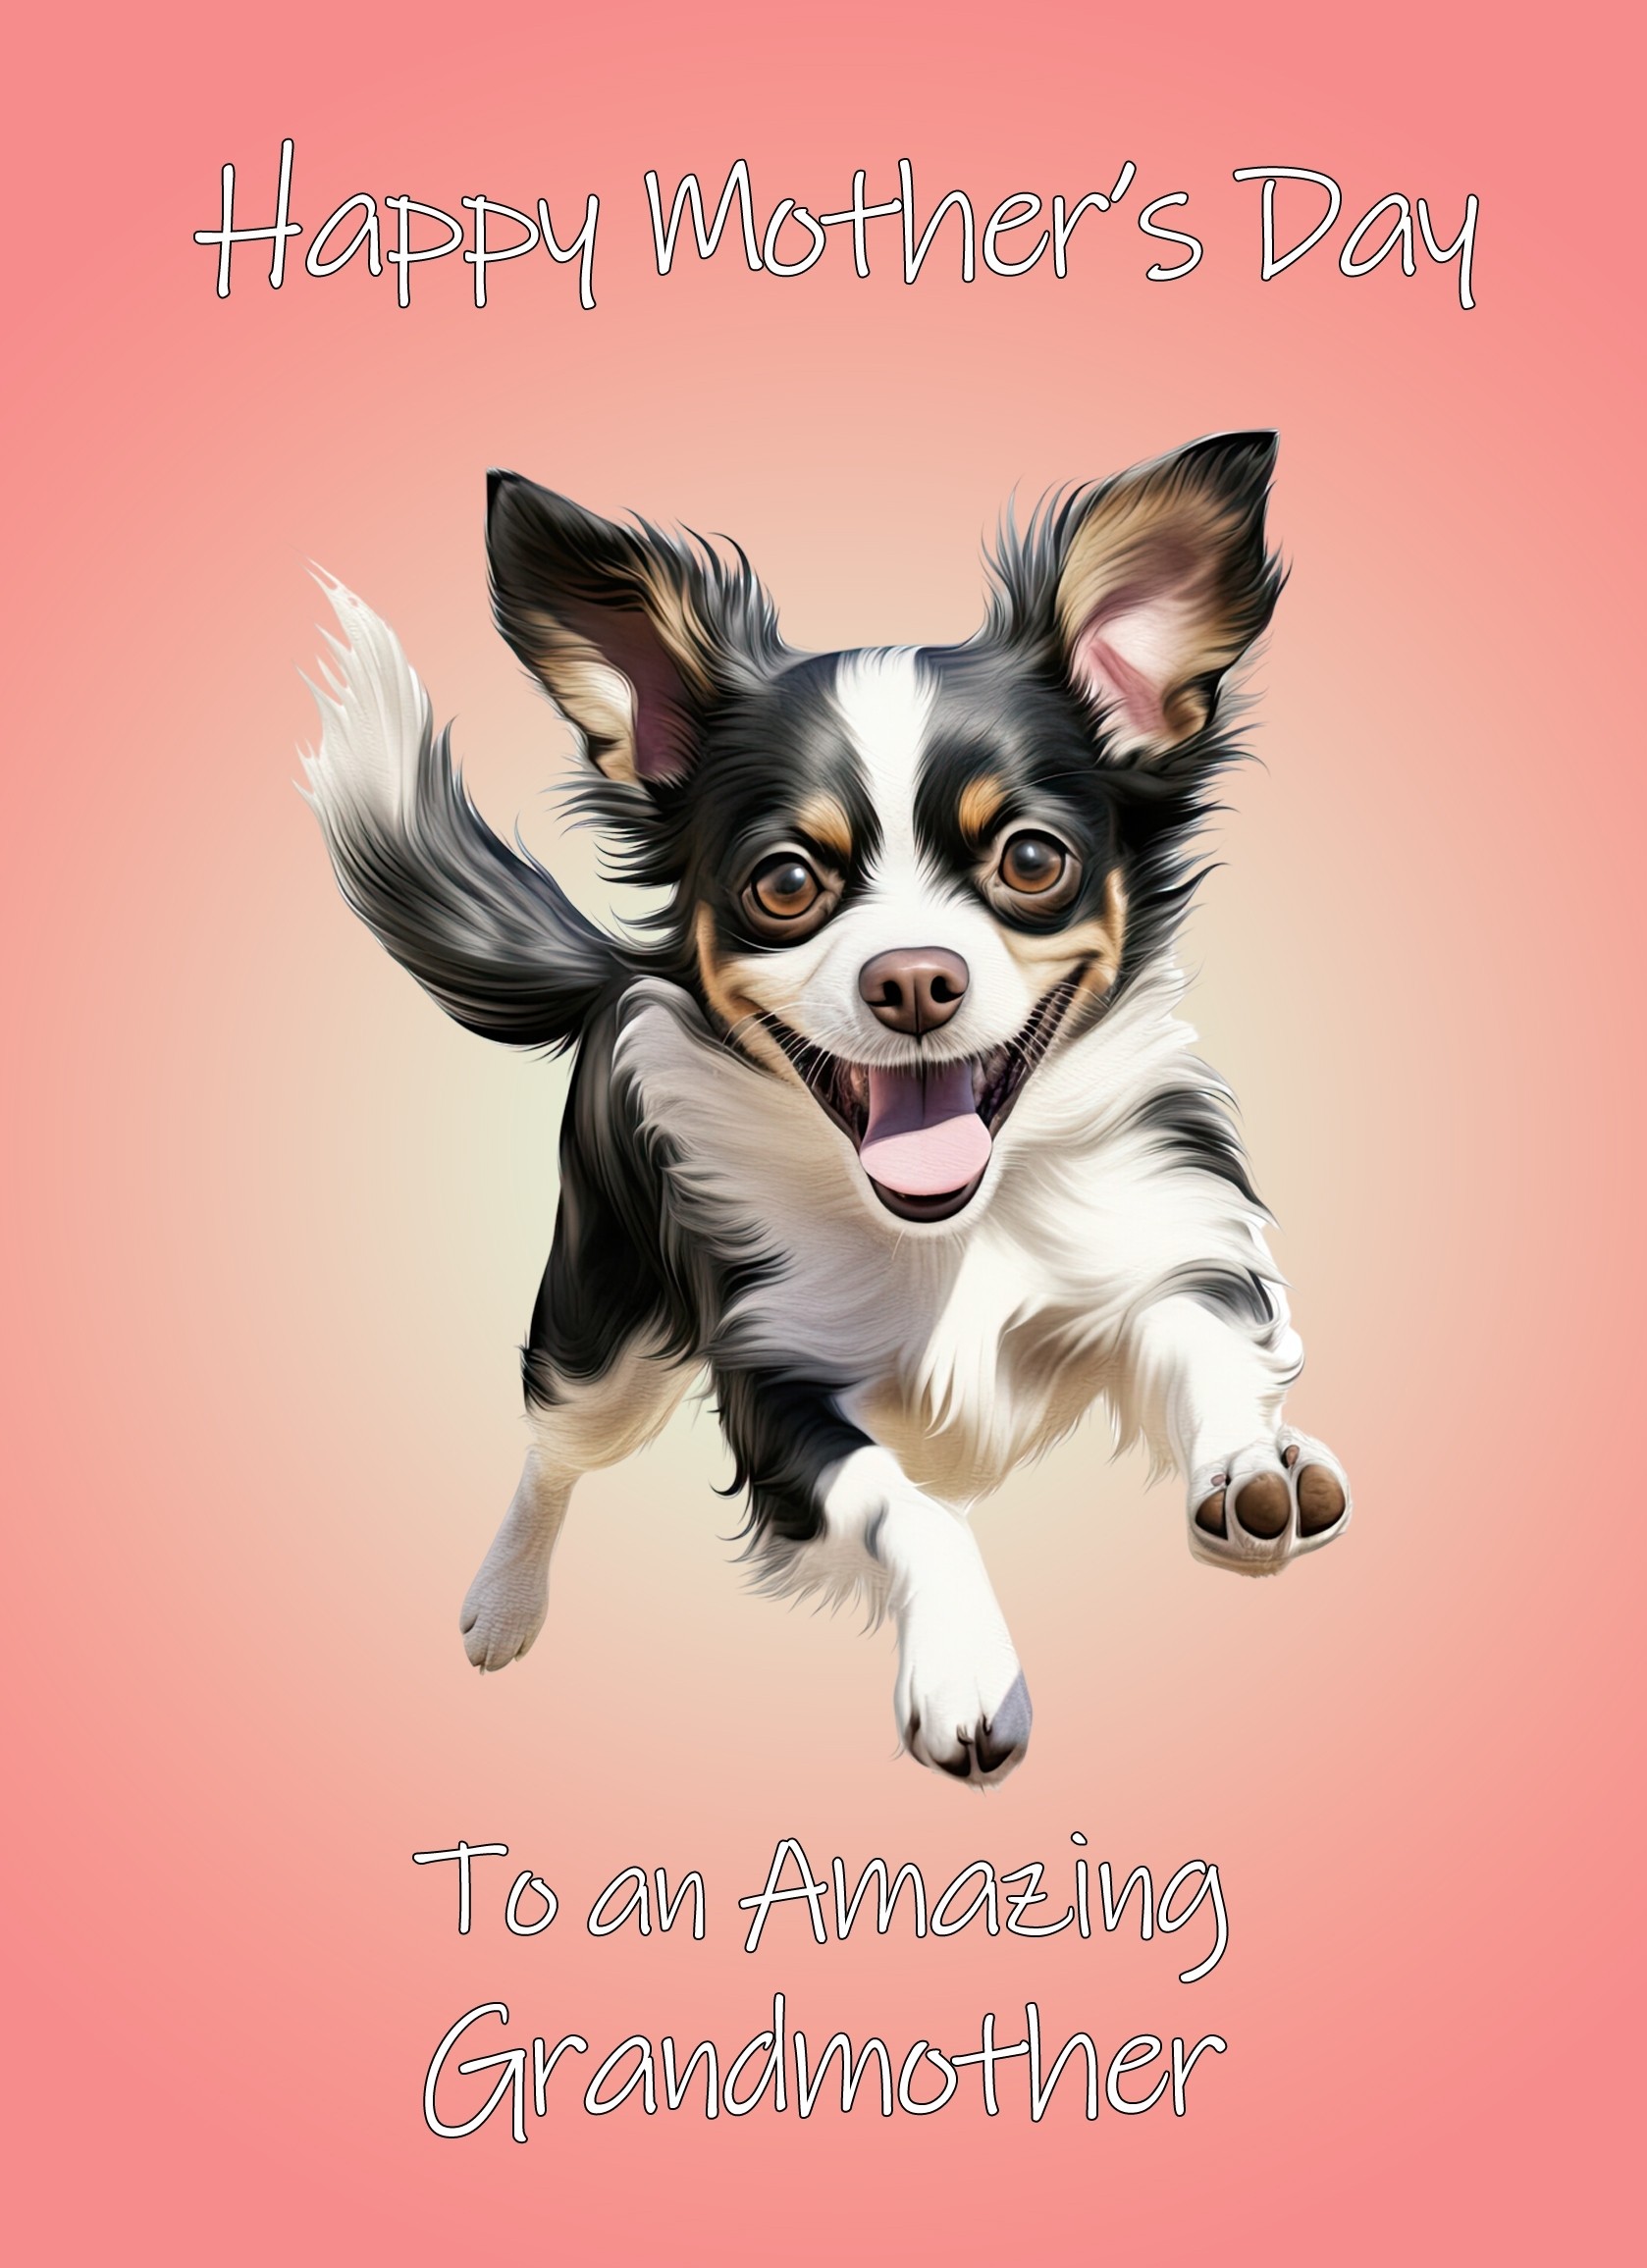 Chihuahua Dog Mothers Day Card For Grandmother